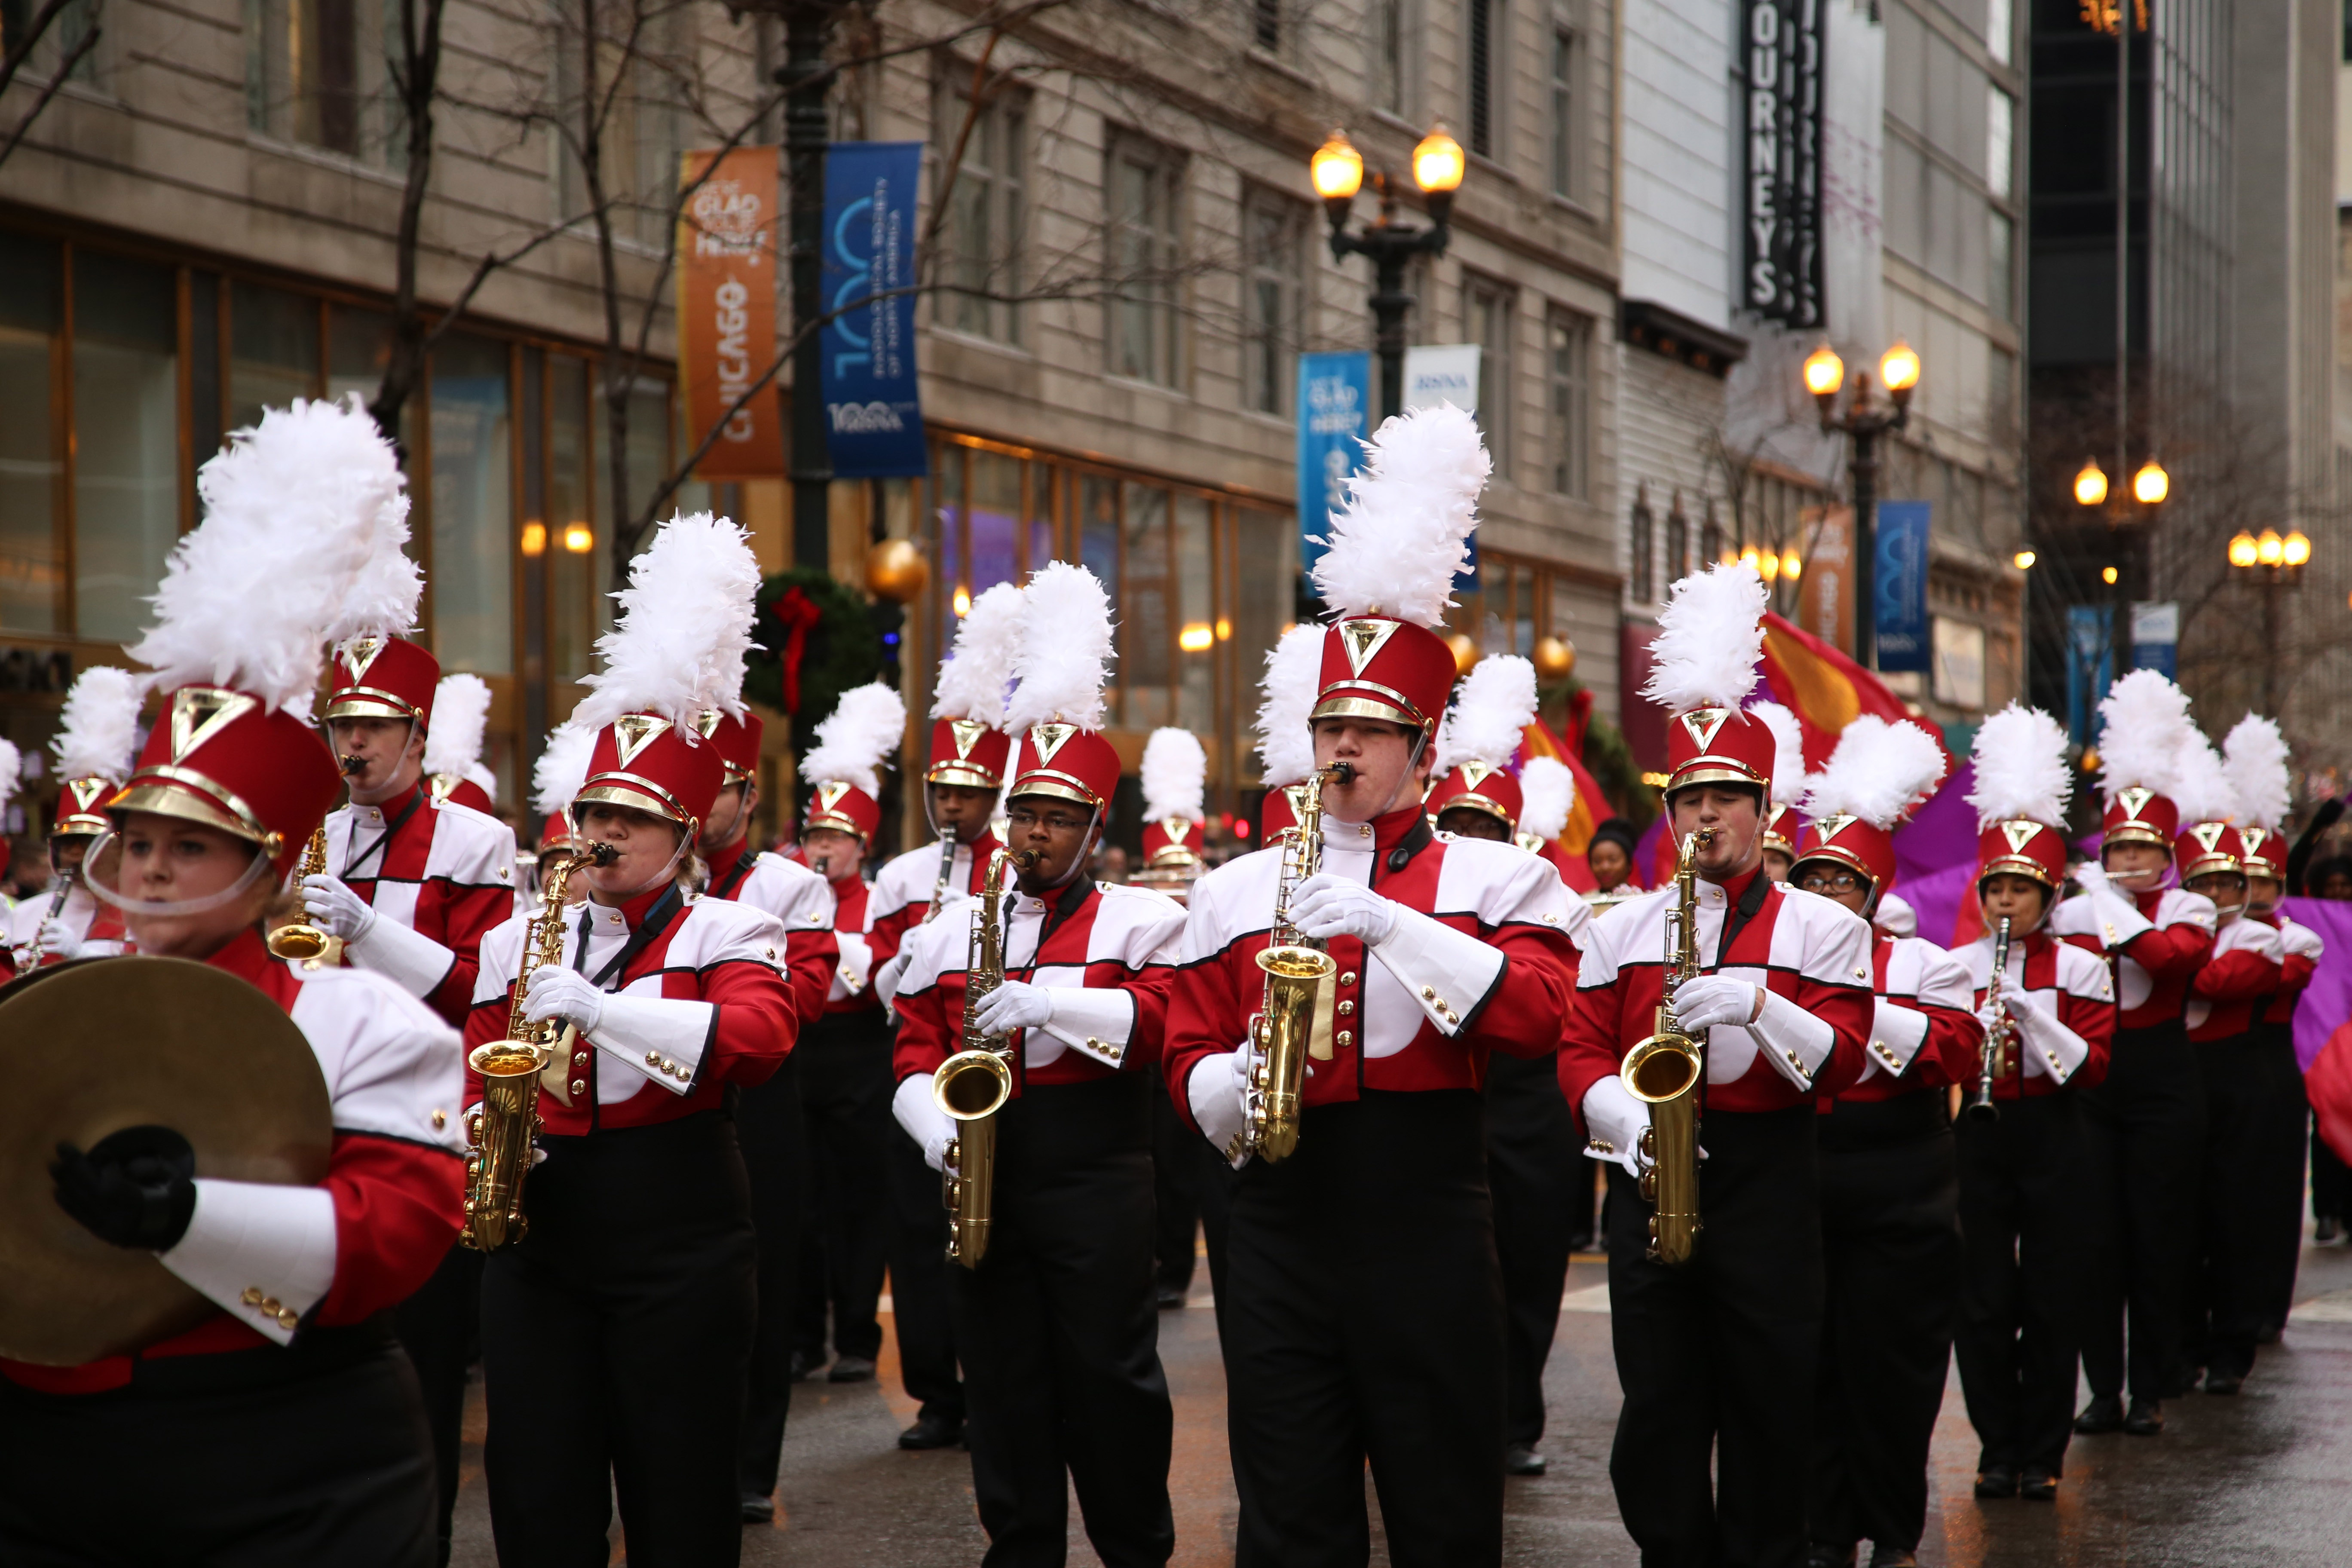 Thanksgiving March parade in Chicago, Illinois image Free stock photo